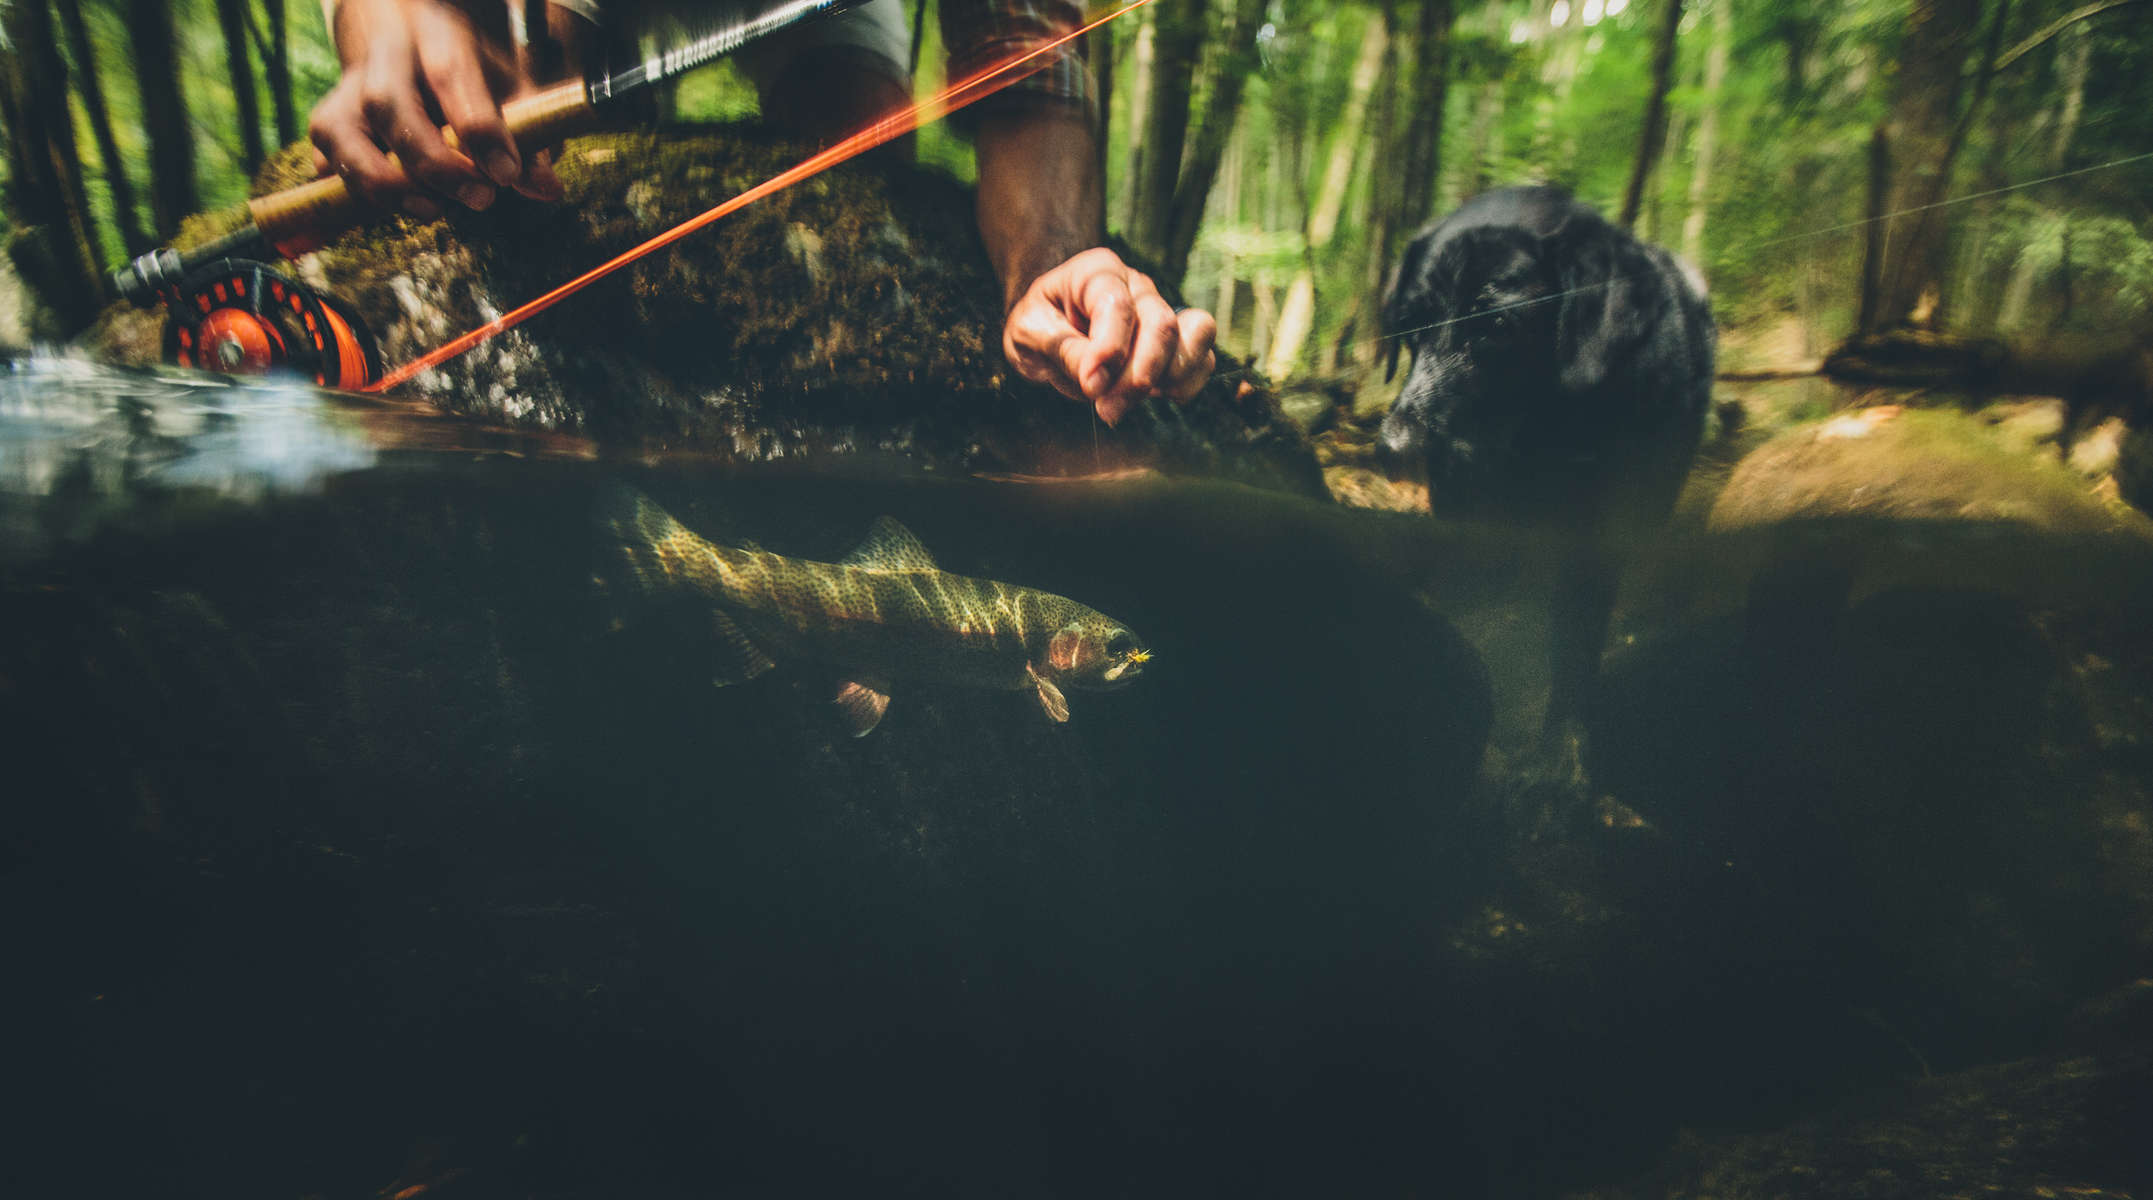 The wingman outfitter and man fishing with dog from canoe and in stream for rainbow trout in Virginia in the Blue Ridge Mountains.